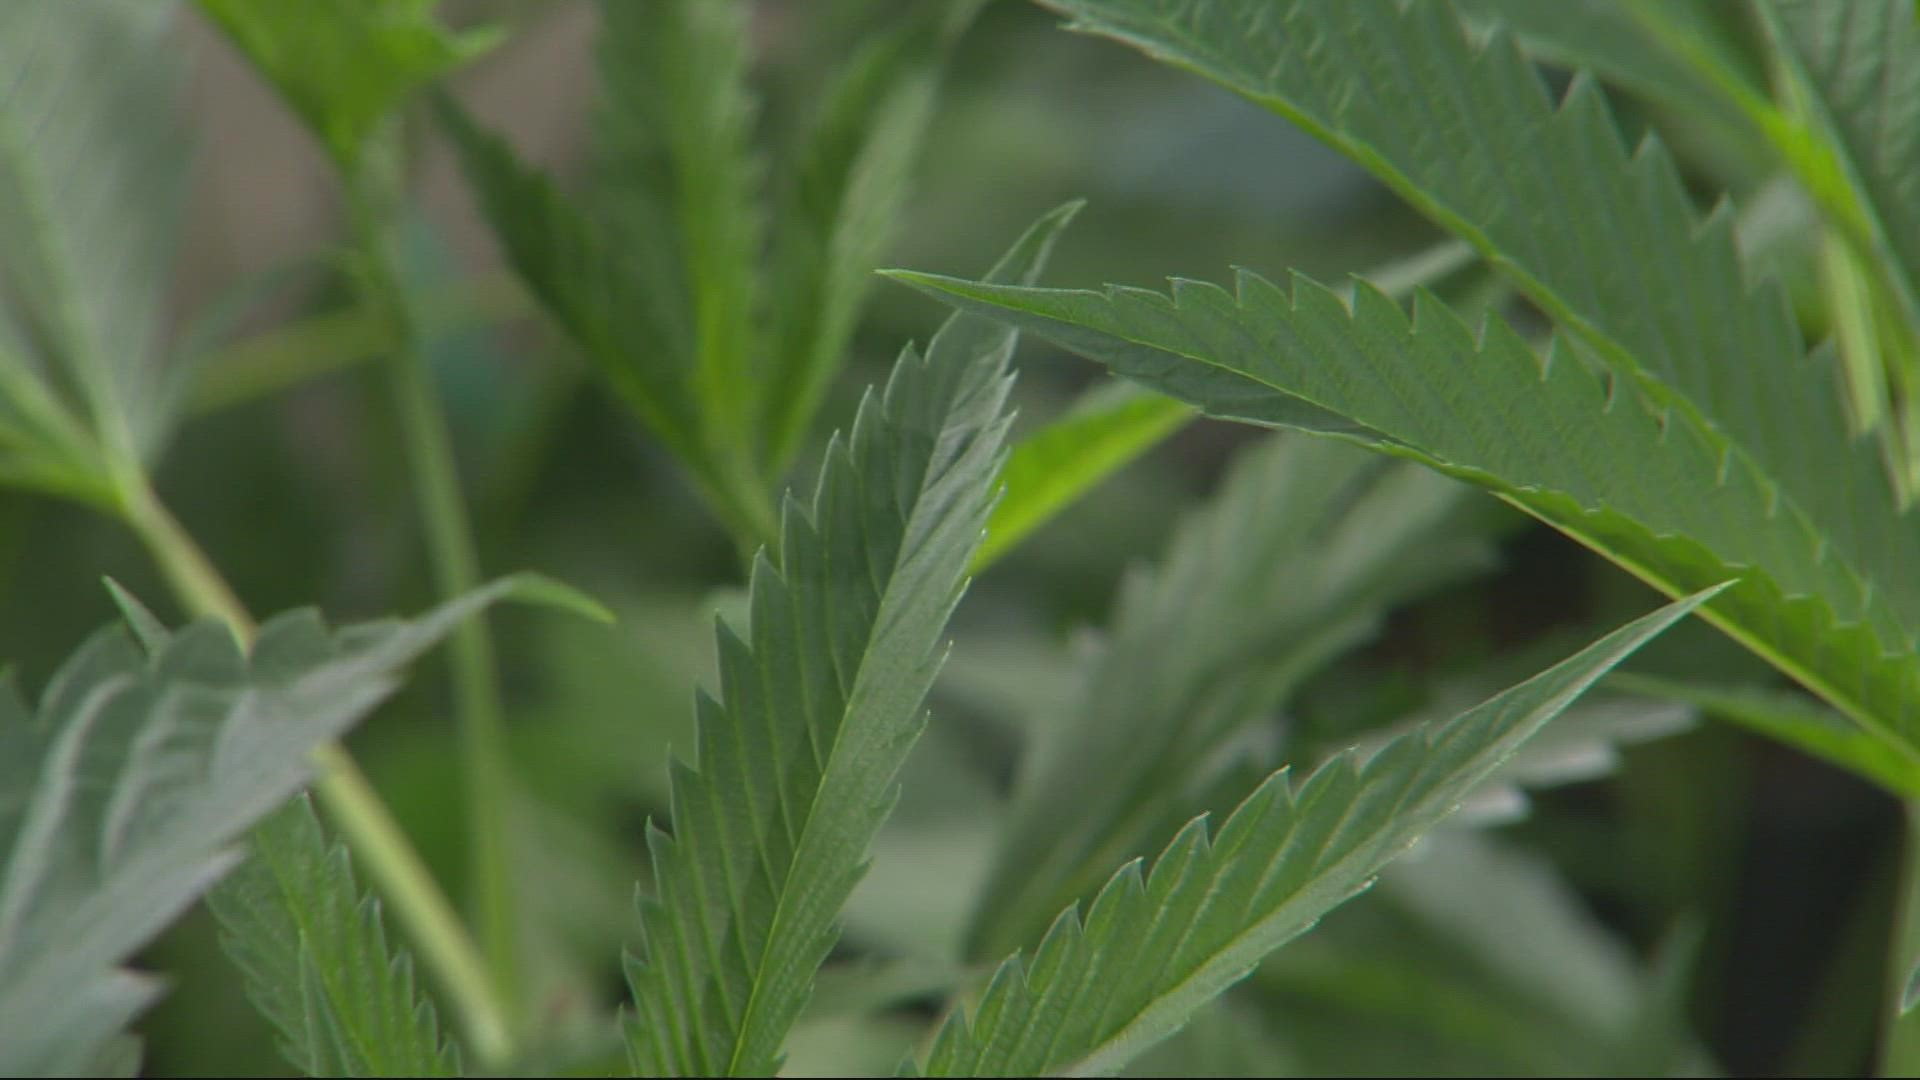 Jackson County says there are so many unlicensed growers, they need help from the feds to crack down. KGW's Alma McCarty reports.